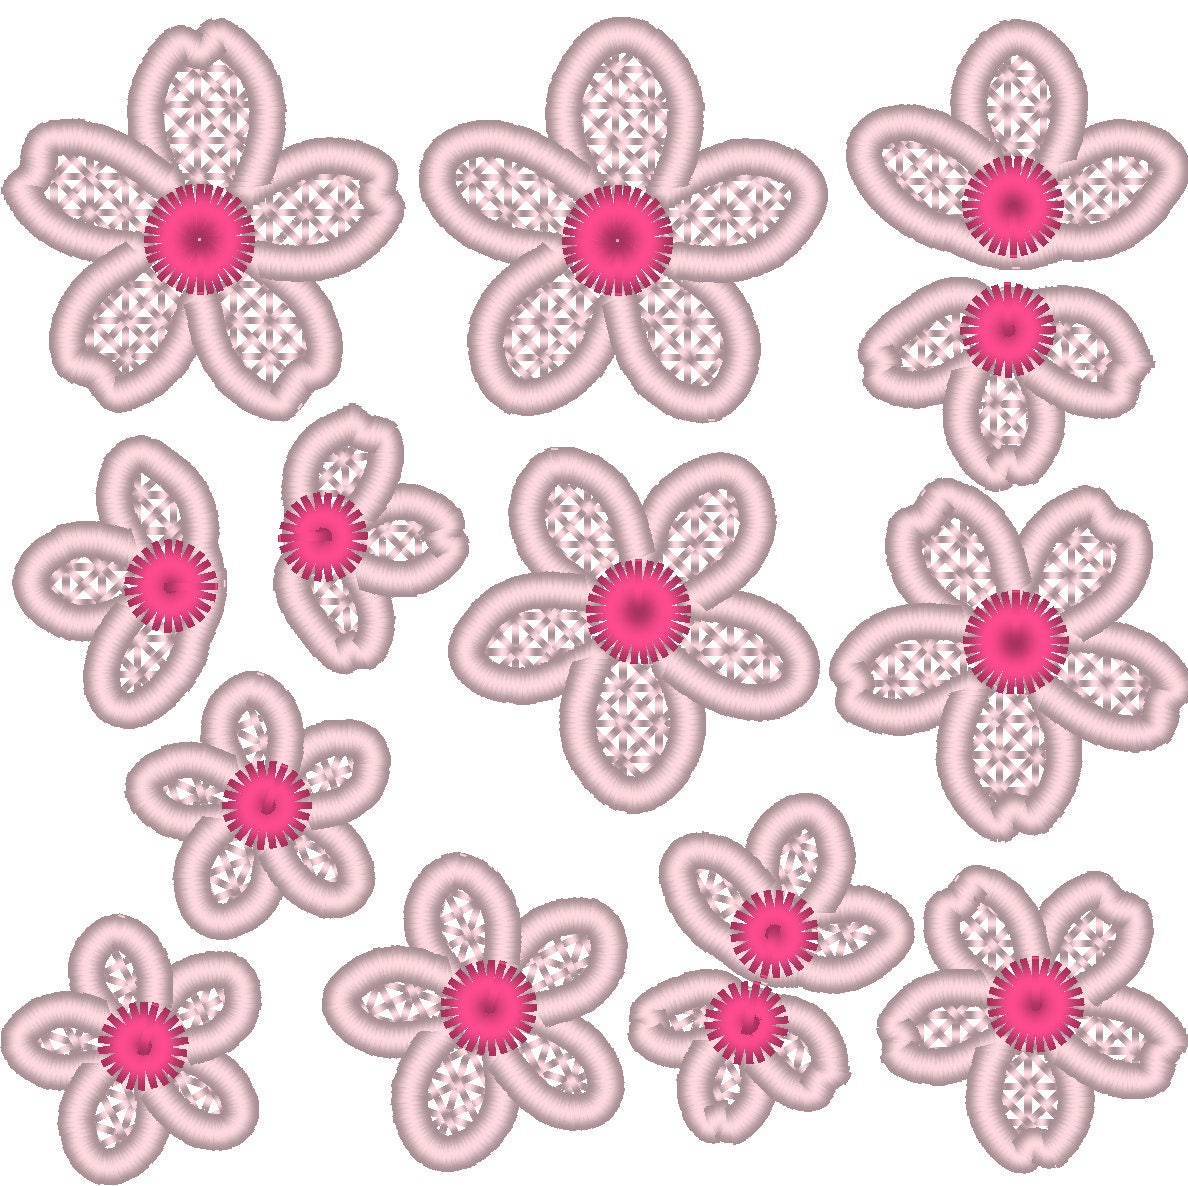 Digital File~ Embroidered Cherry Blossom Flower Key Chain Fob Design for  Machine Embroidery. 4x4 Hoop. LynnOma Designs